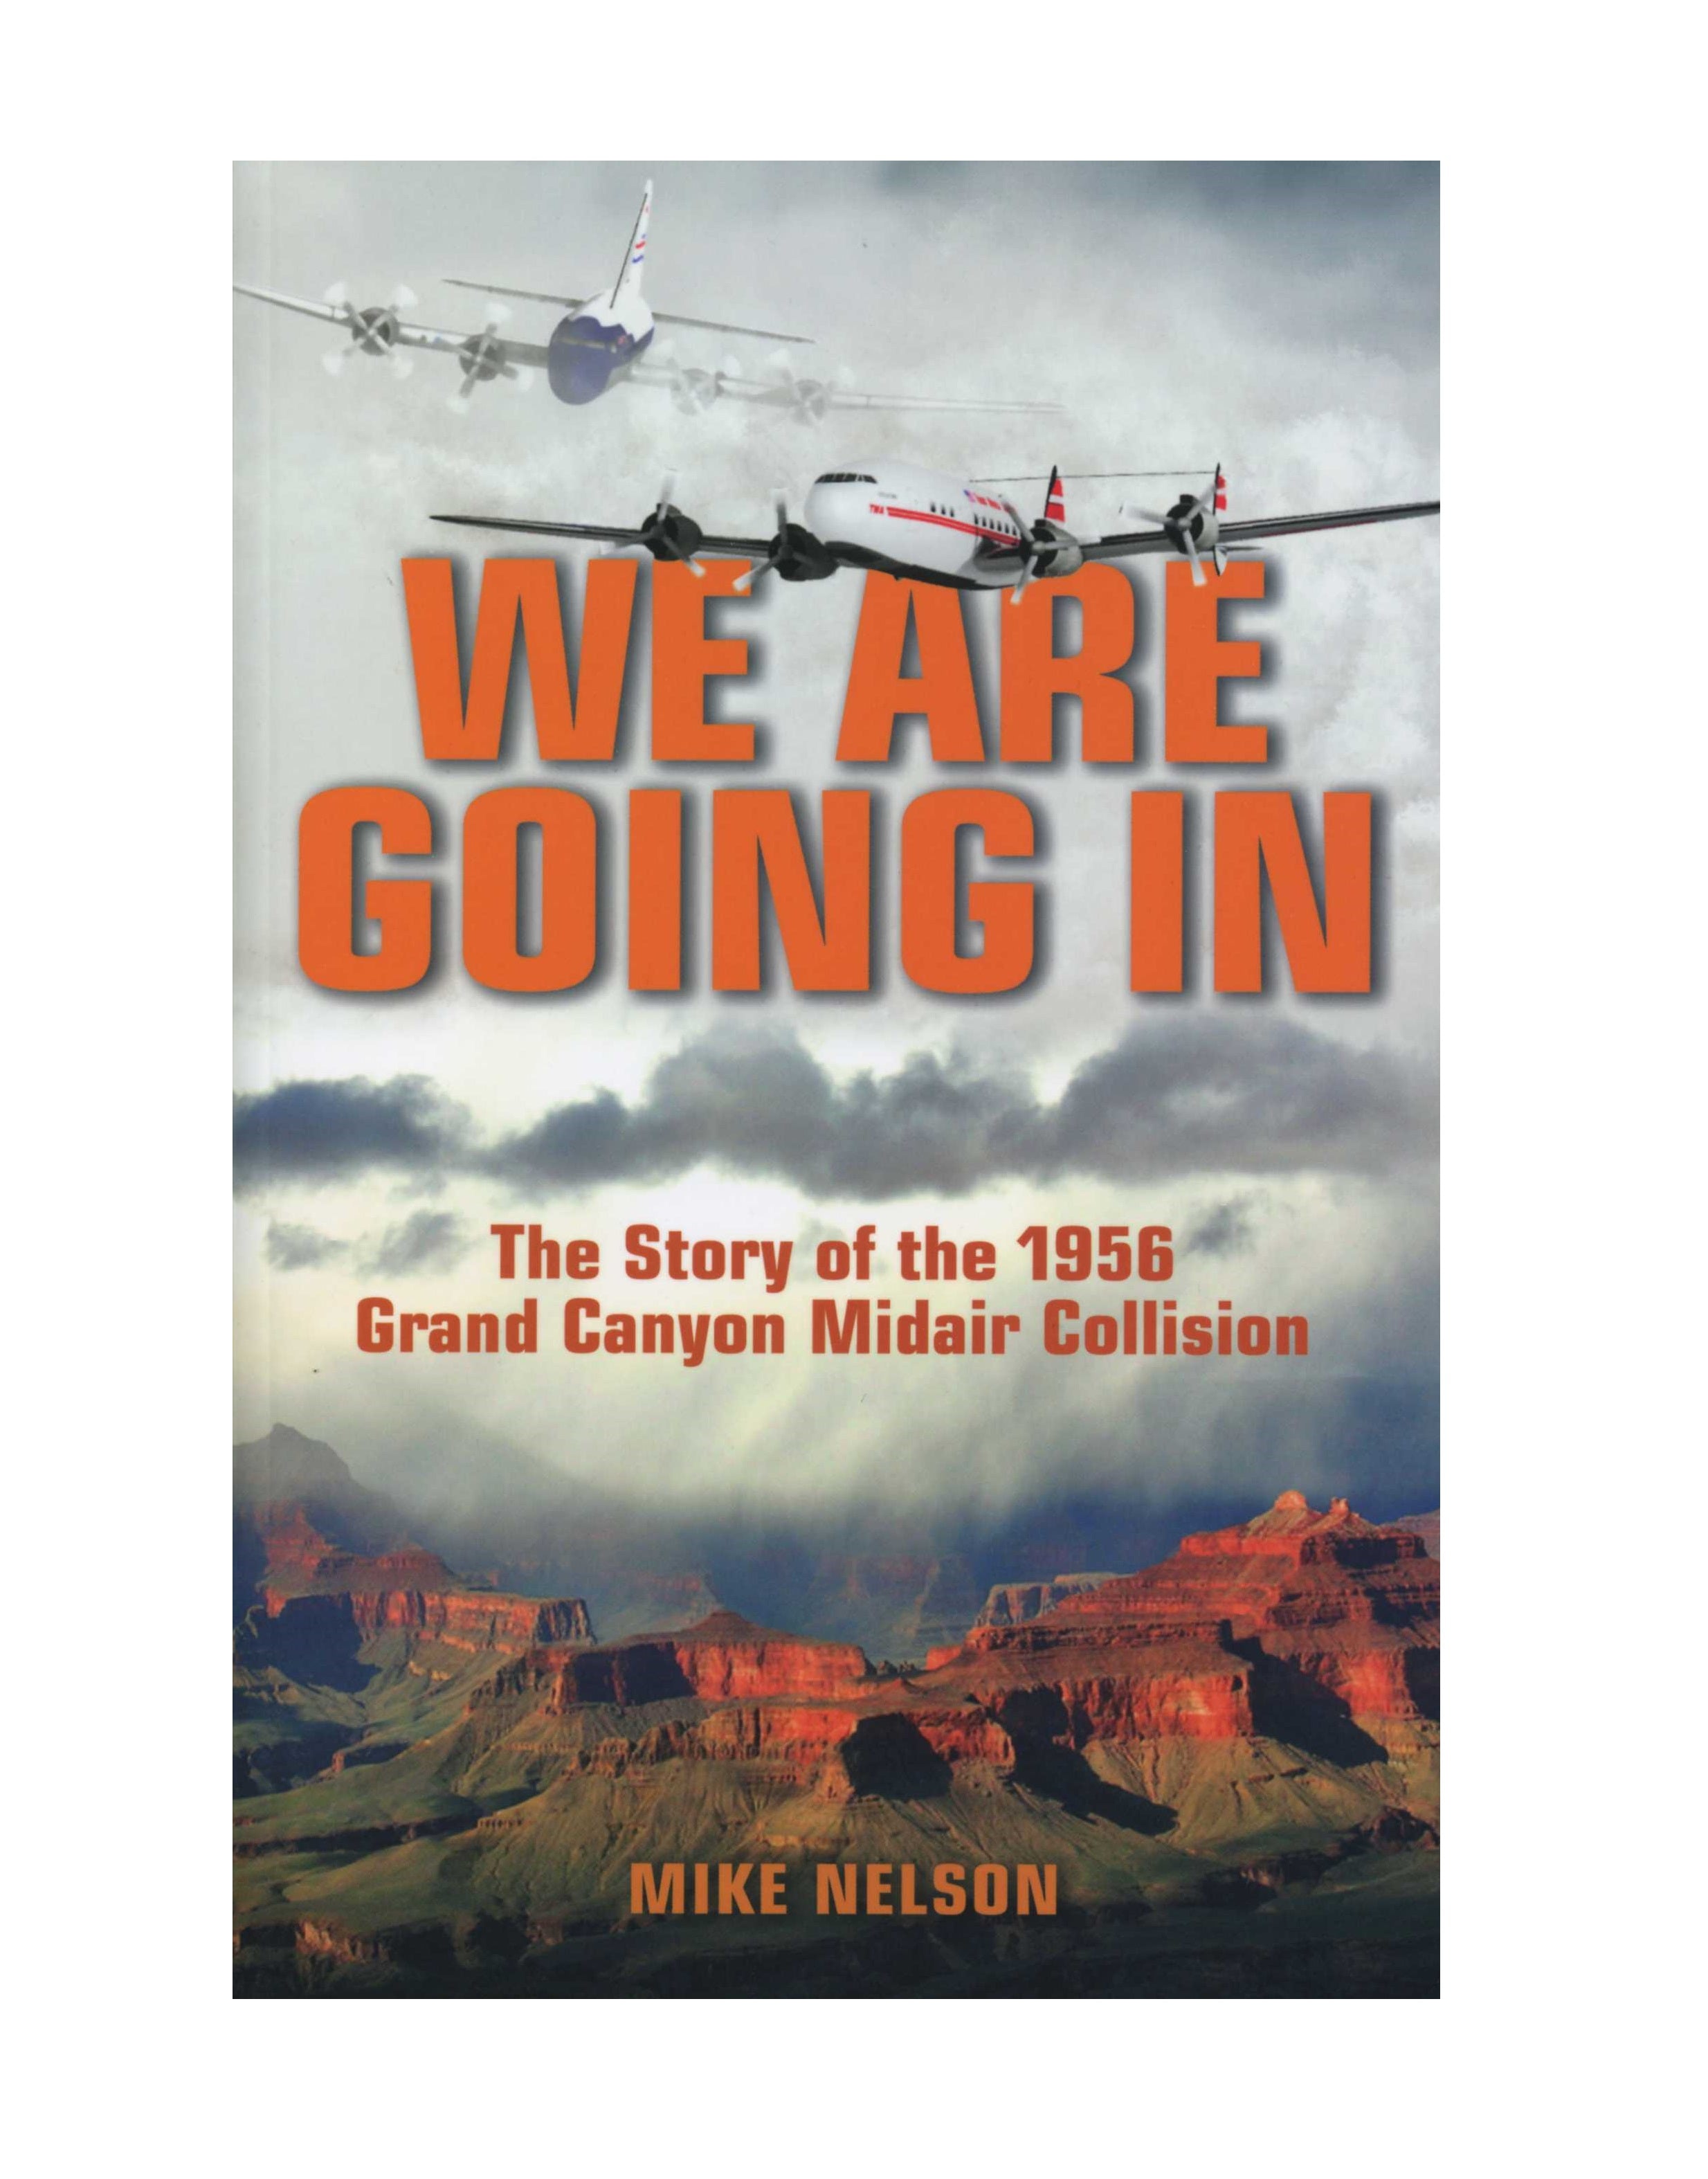 We are Going In: The Story of the 1956 Grand Canyon Midair Collision